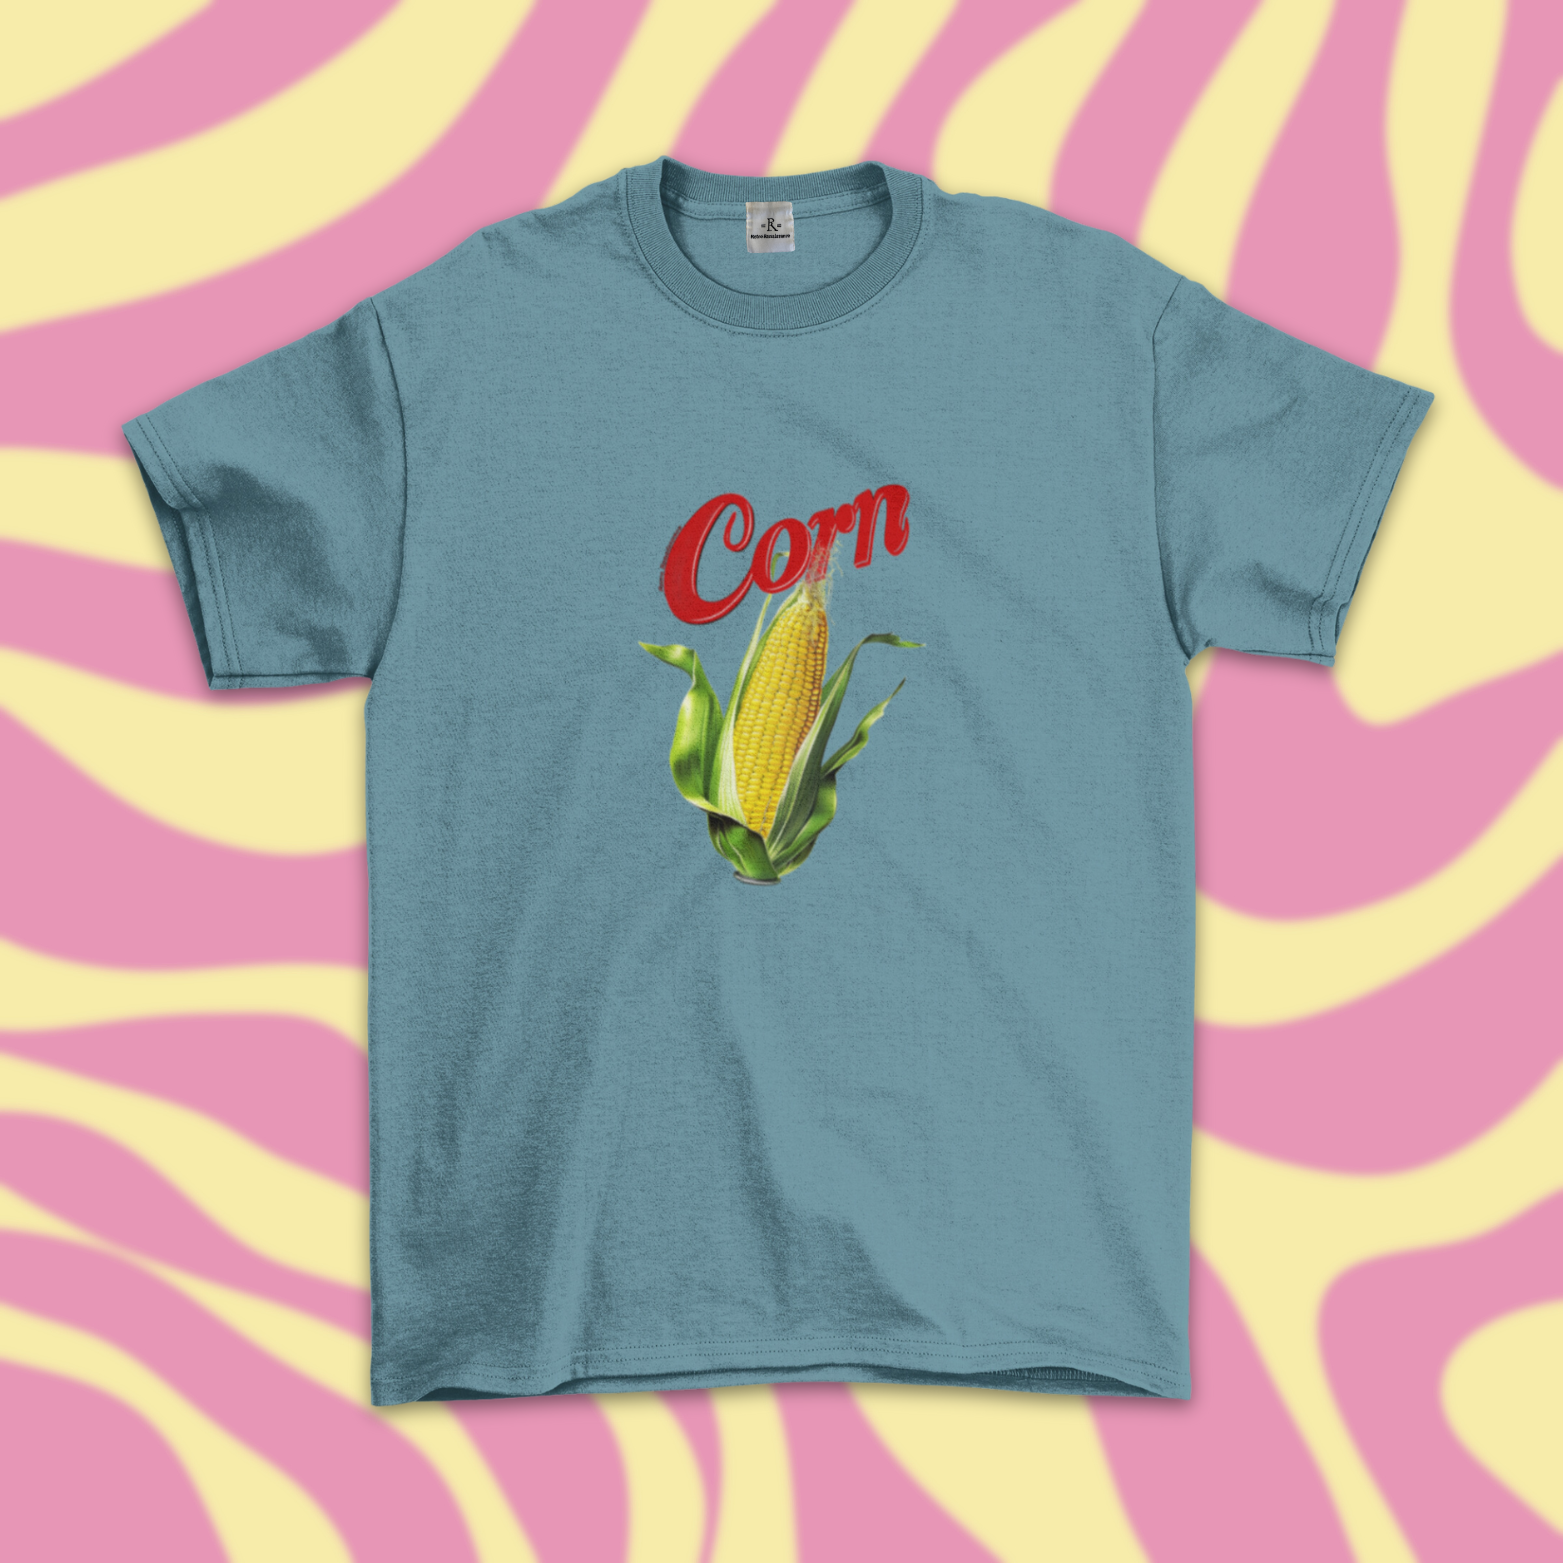 Vintage Food Poster Tee, Corn Graphic T Shirt